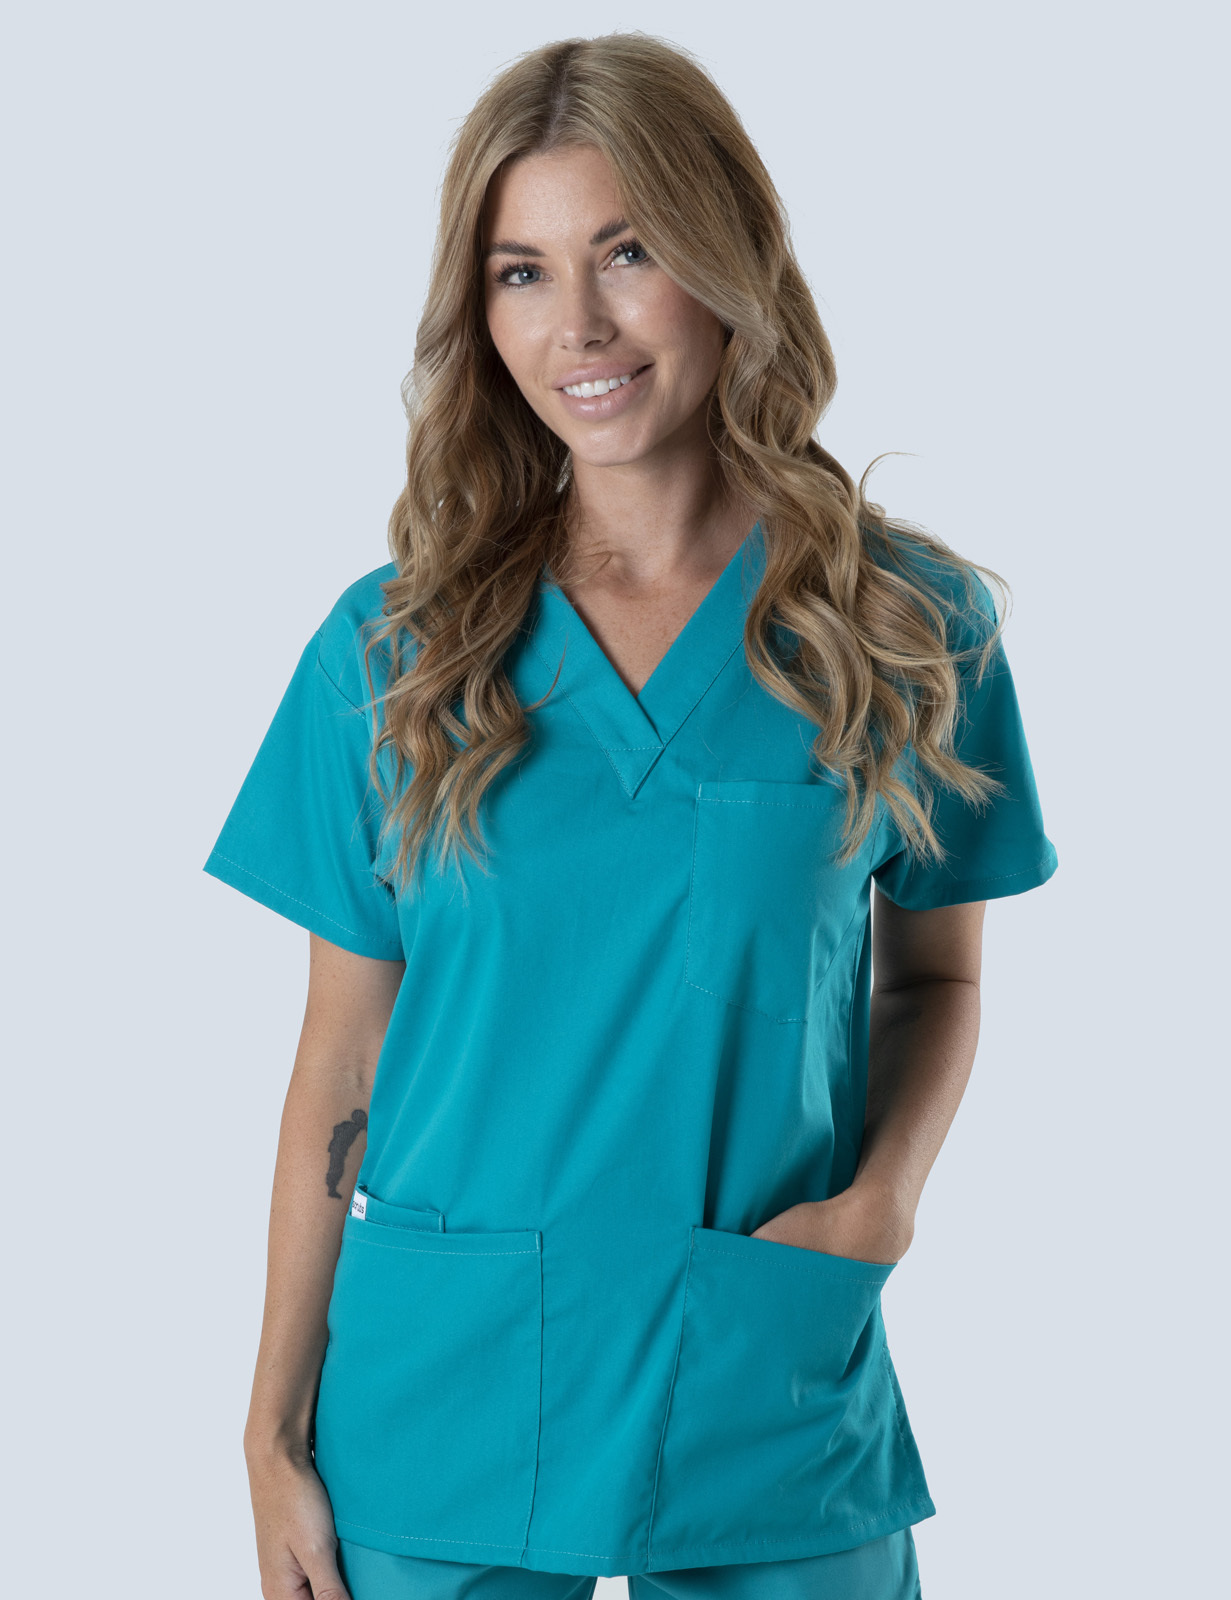 Toowoomba Hospital - Doctor (4 Pocket Scrub Top and Cargo Pants in Teal incl Logos)